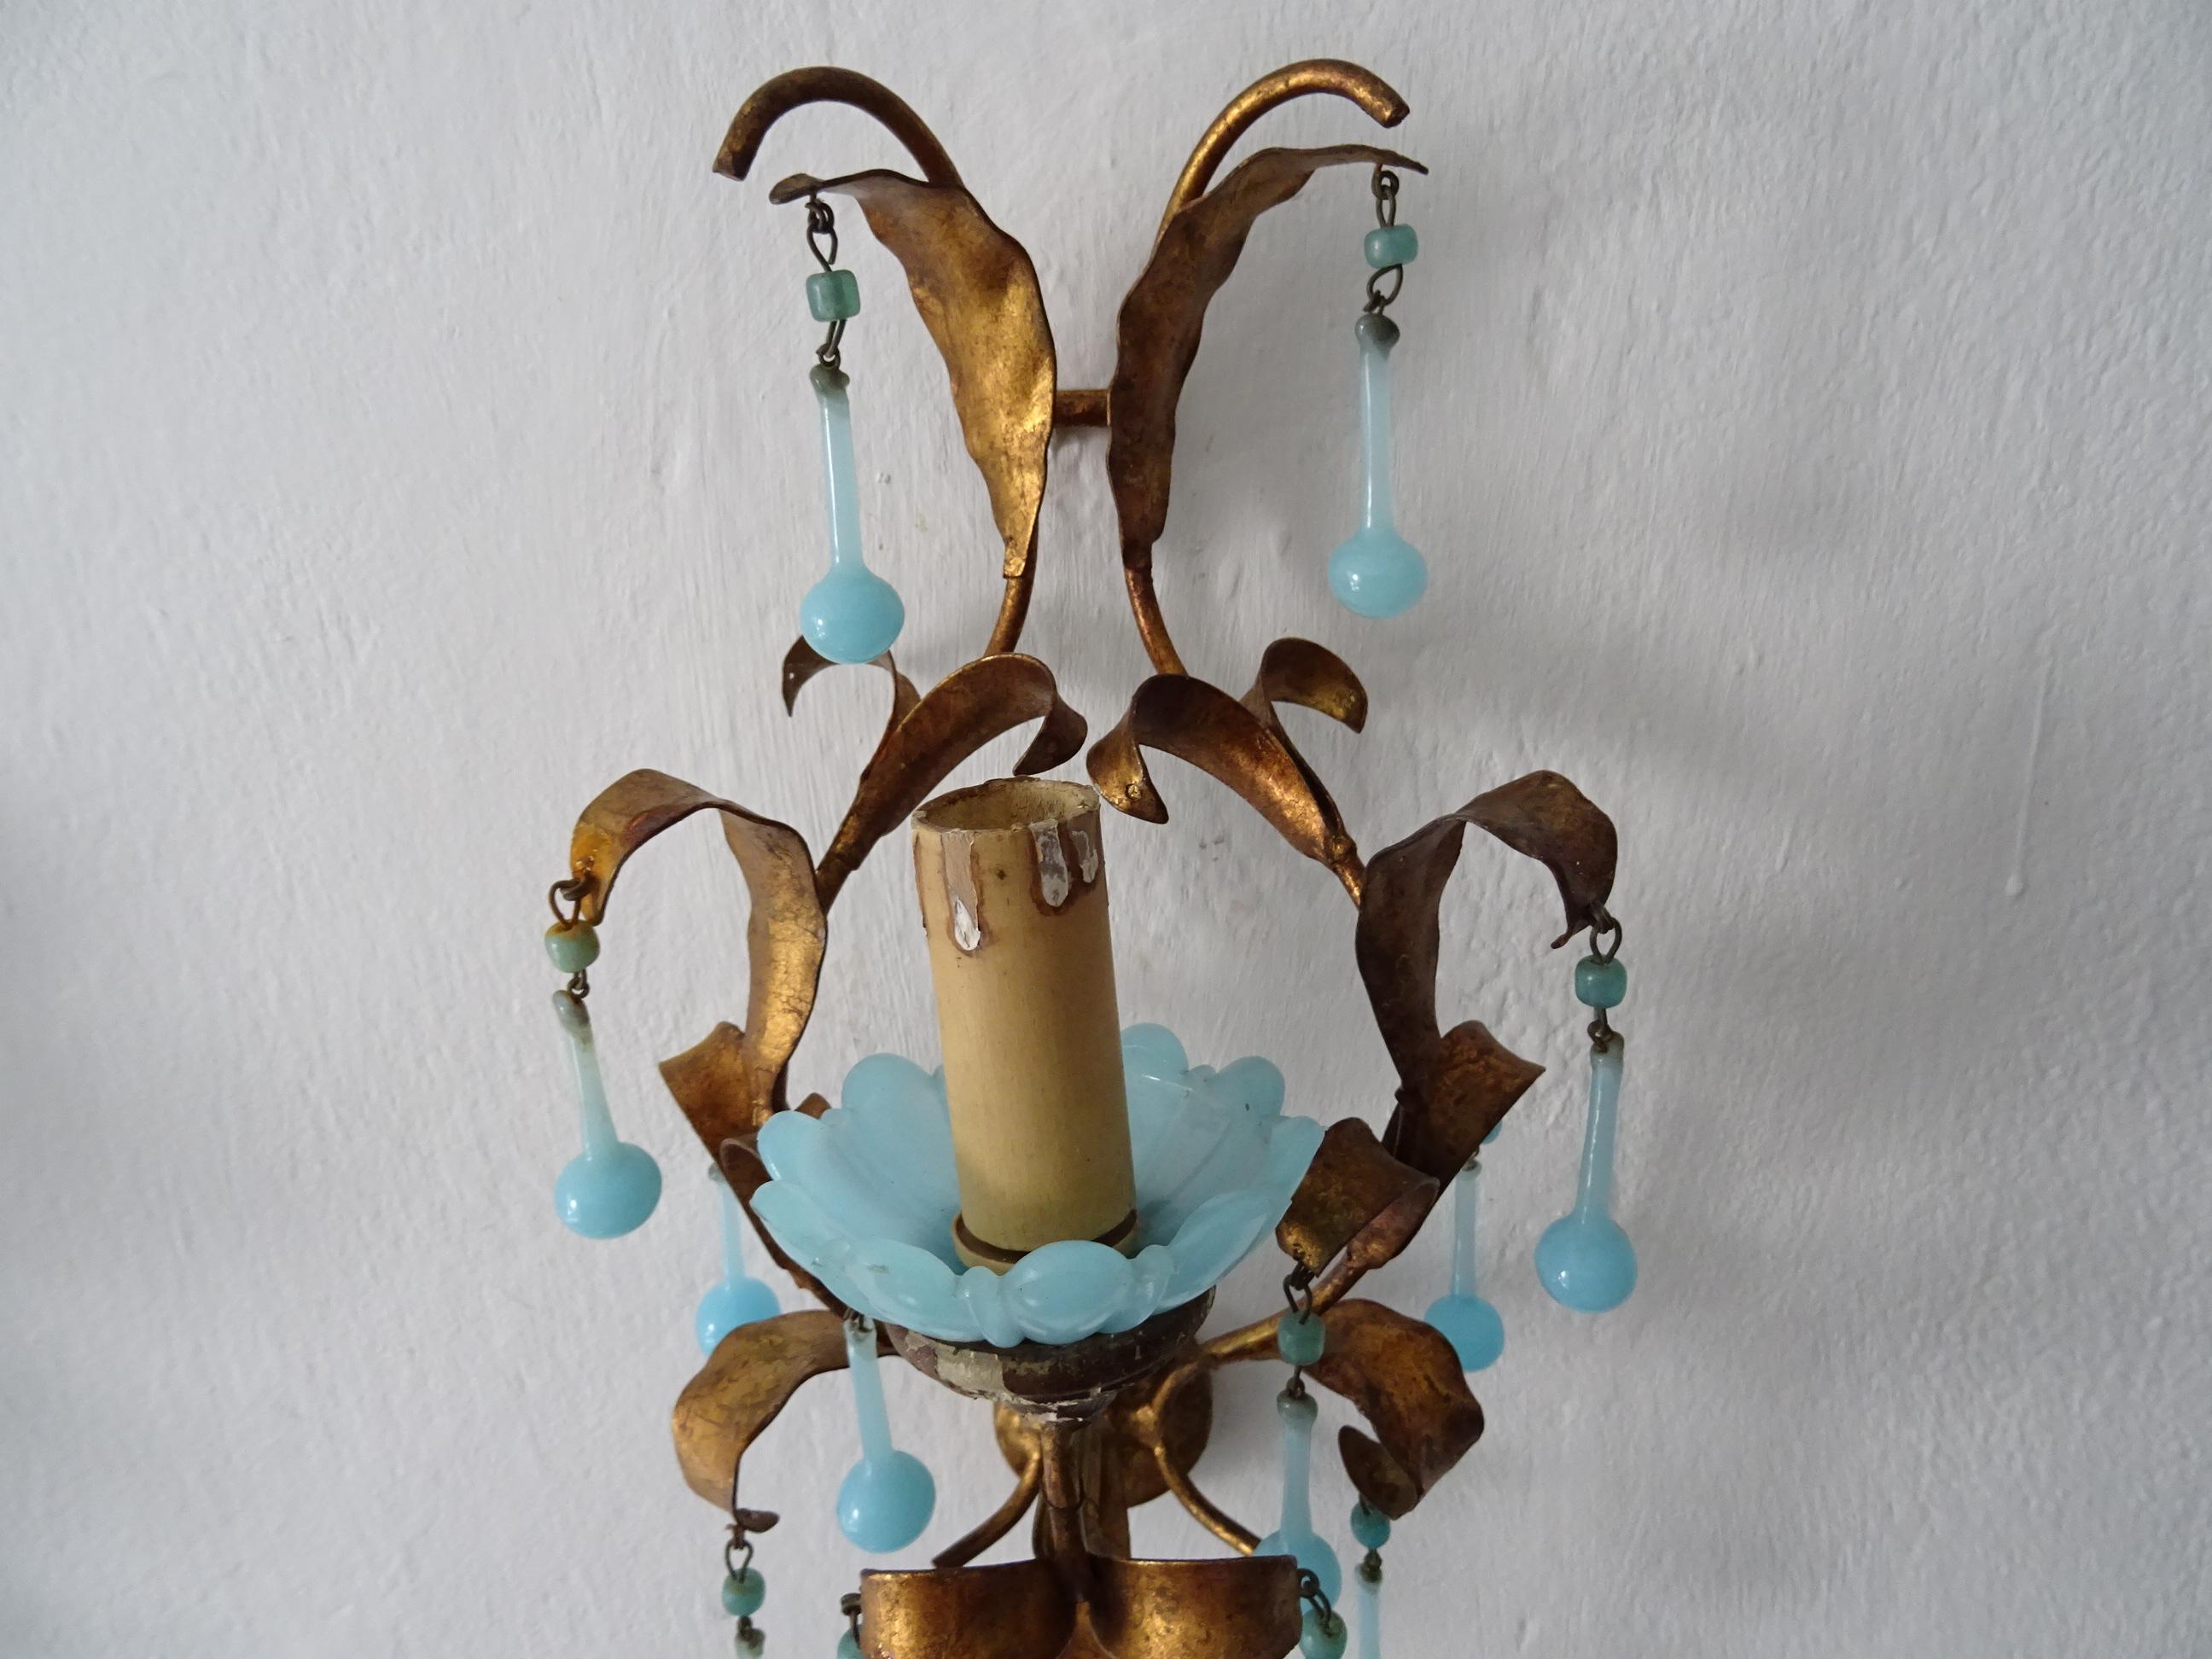 French Tole Aqua Blue Murano Opaline Drops & Beads Bobeches Sconces For Sale 4